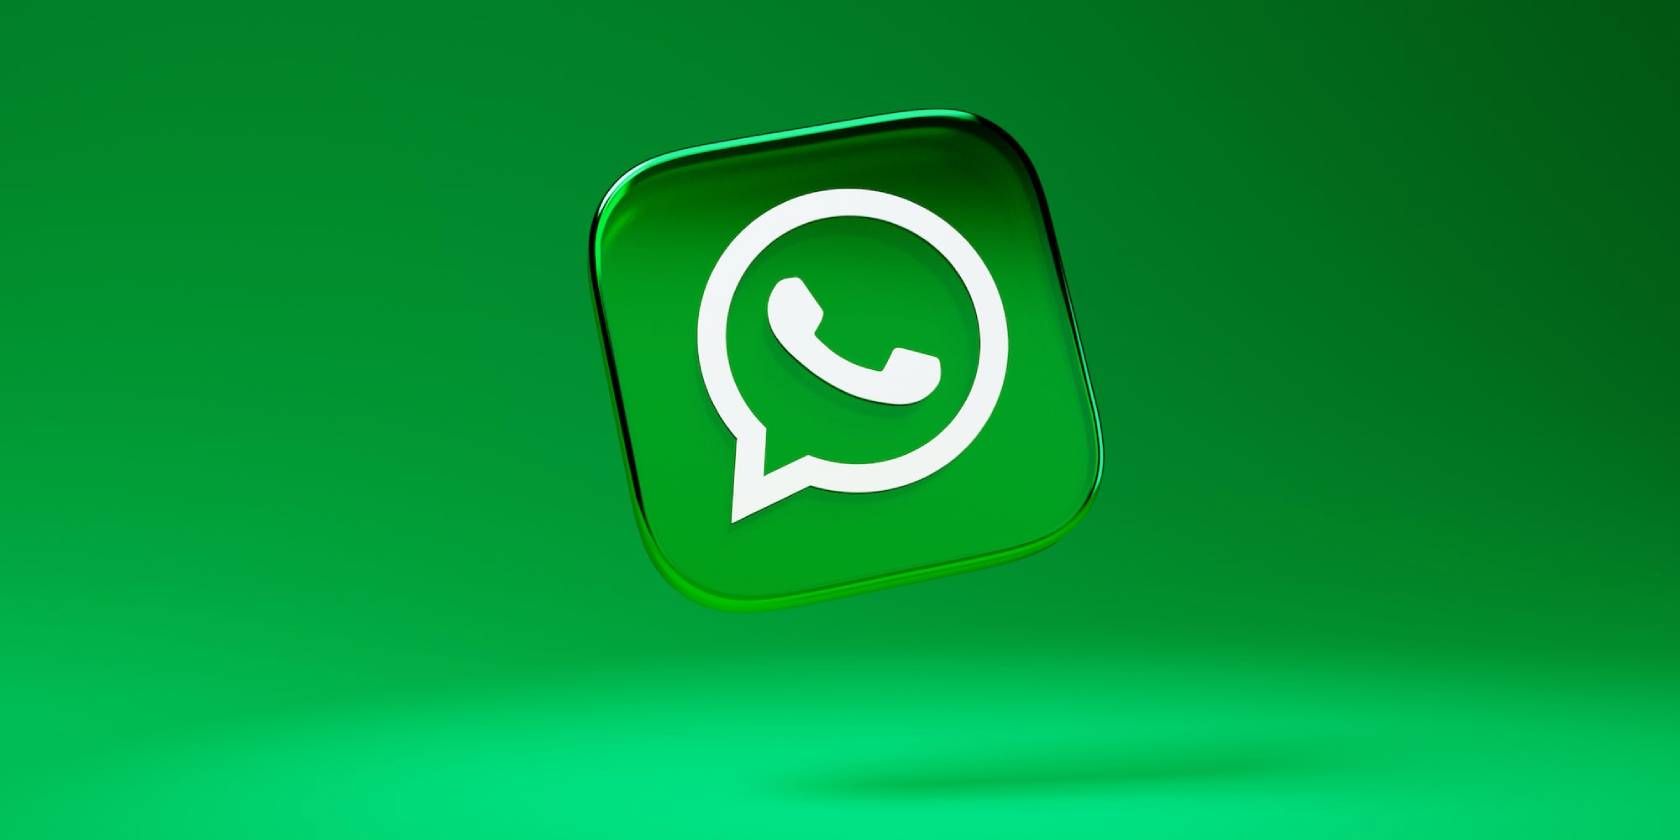 6 Best WhatsApp Tools to Organize Chats, Schedule Messages, and Improve WhatsApp